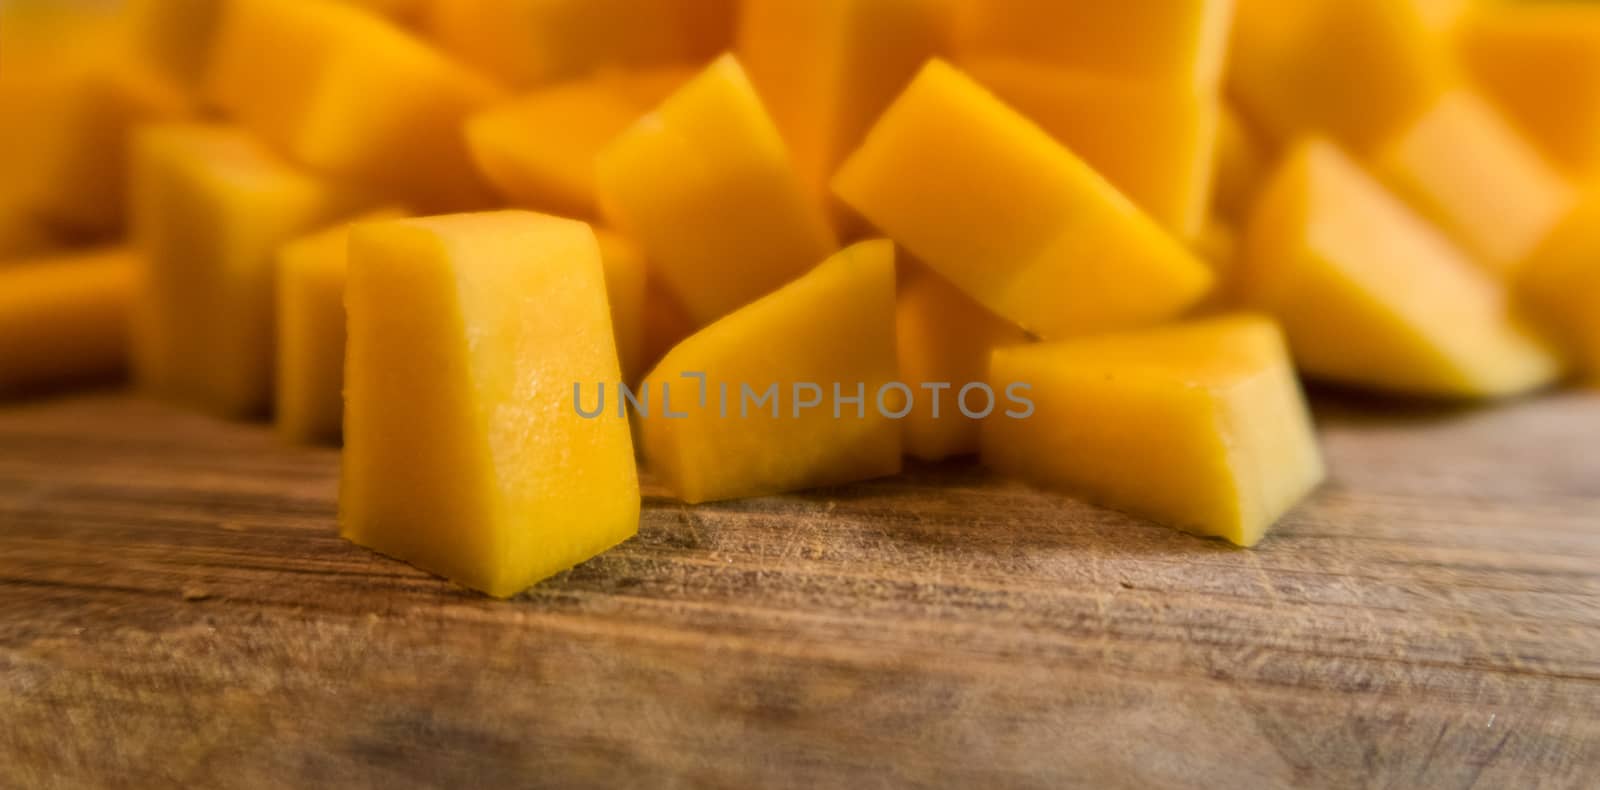 Butternut squash or mango chopped on wooden table by fpalaticky